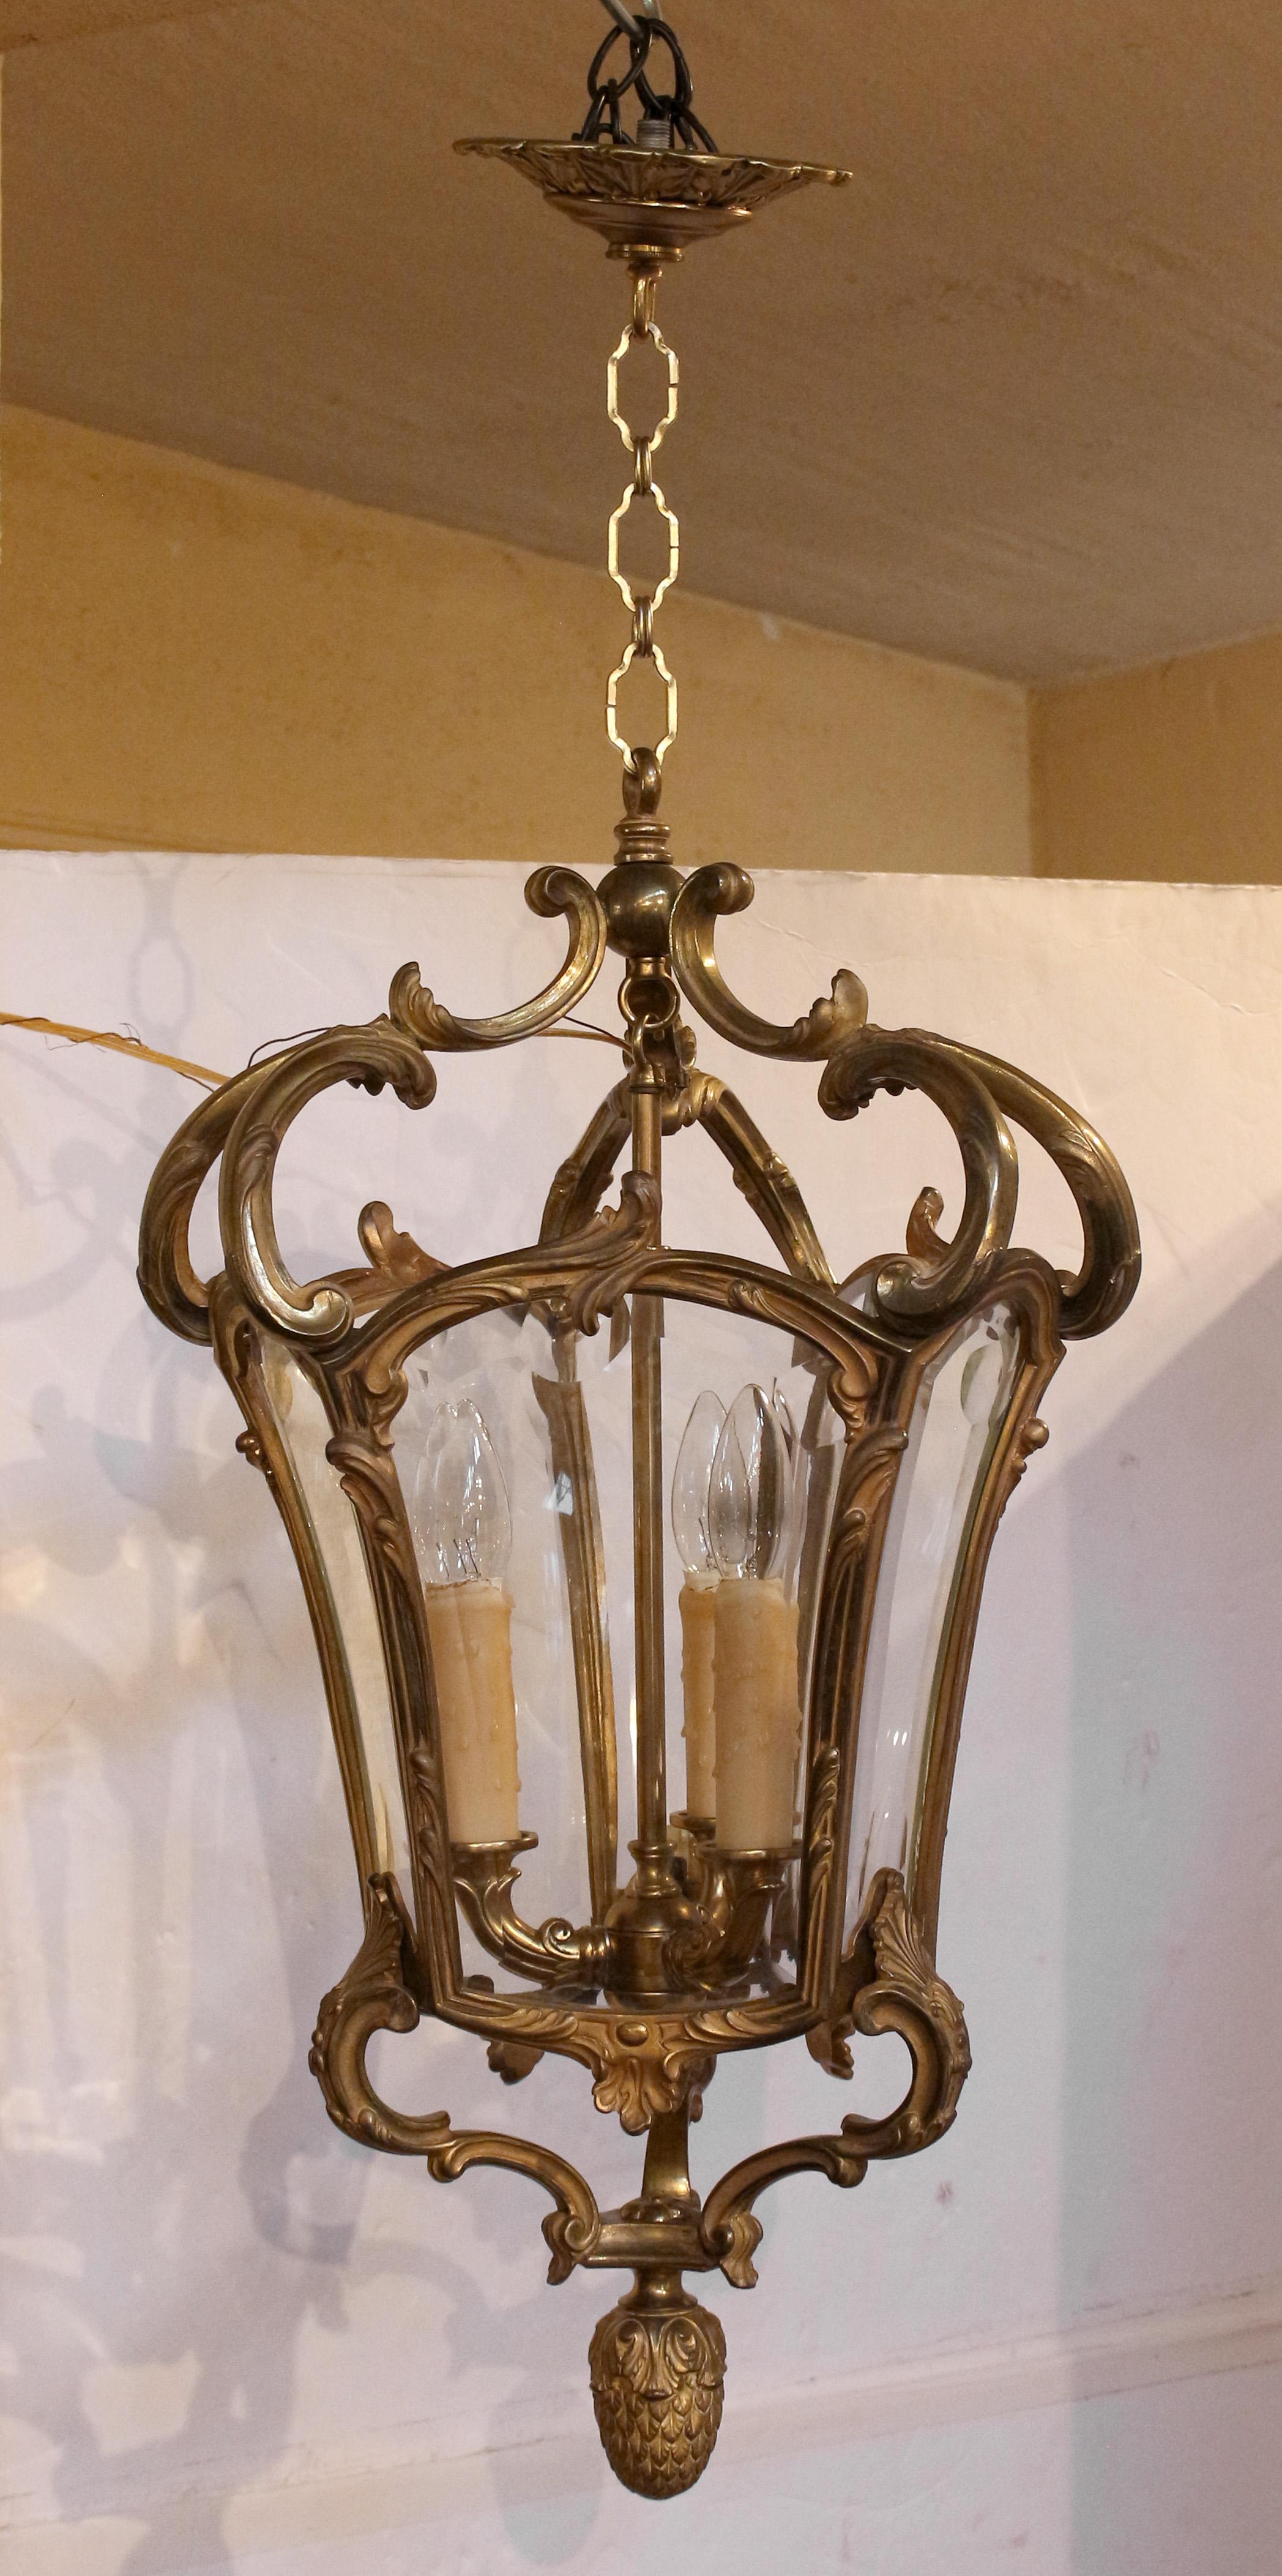 Early 20th century gilt bronze & glass hall lantern, French. In the baroque to rococo transitional taste. Pineapple drop symbolizing 